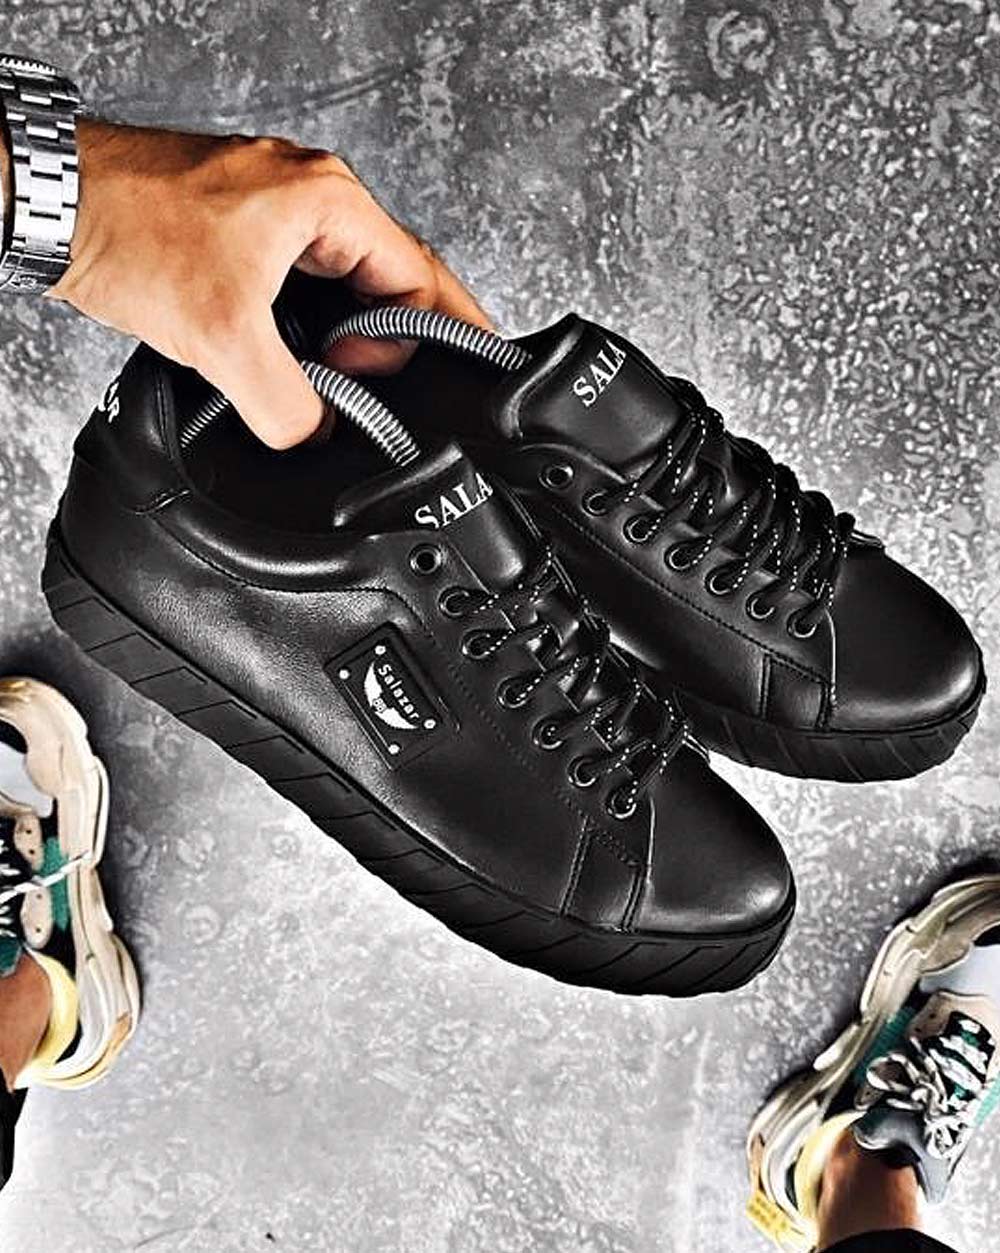 Low black sneakers shoes with trendy full black sole BB salazar